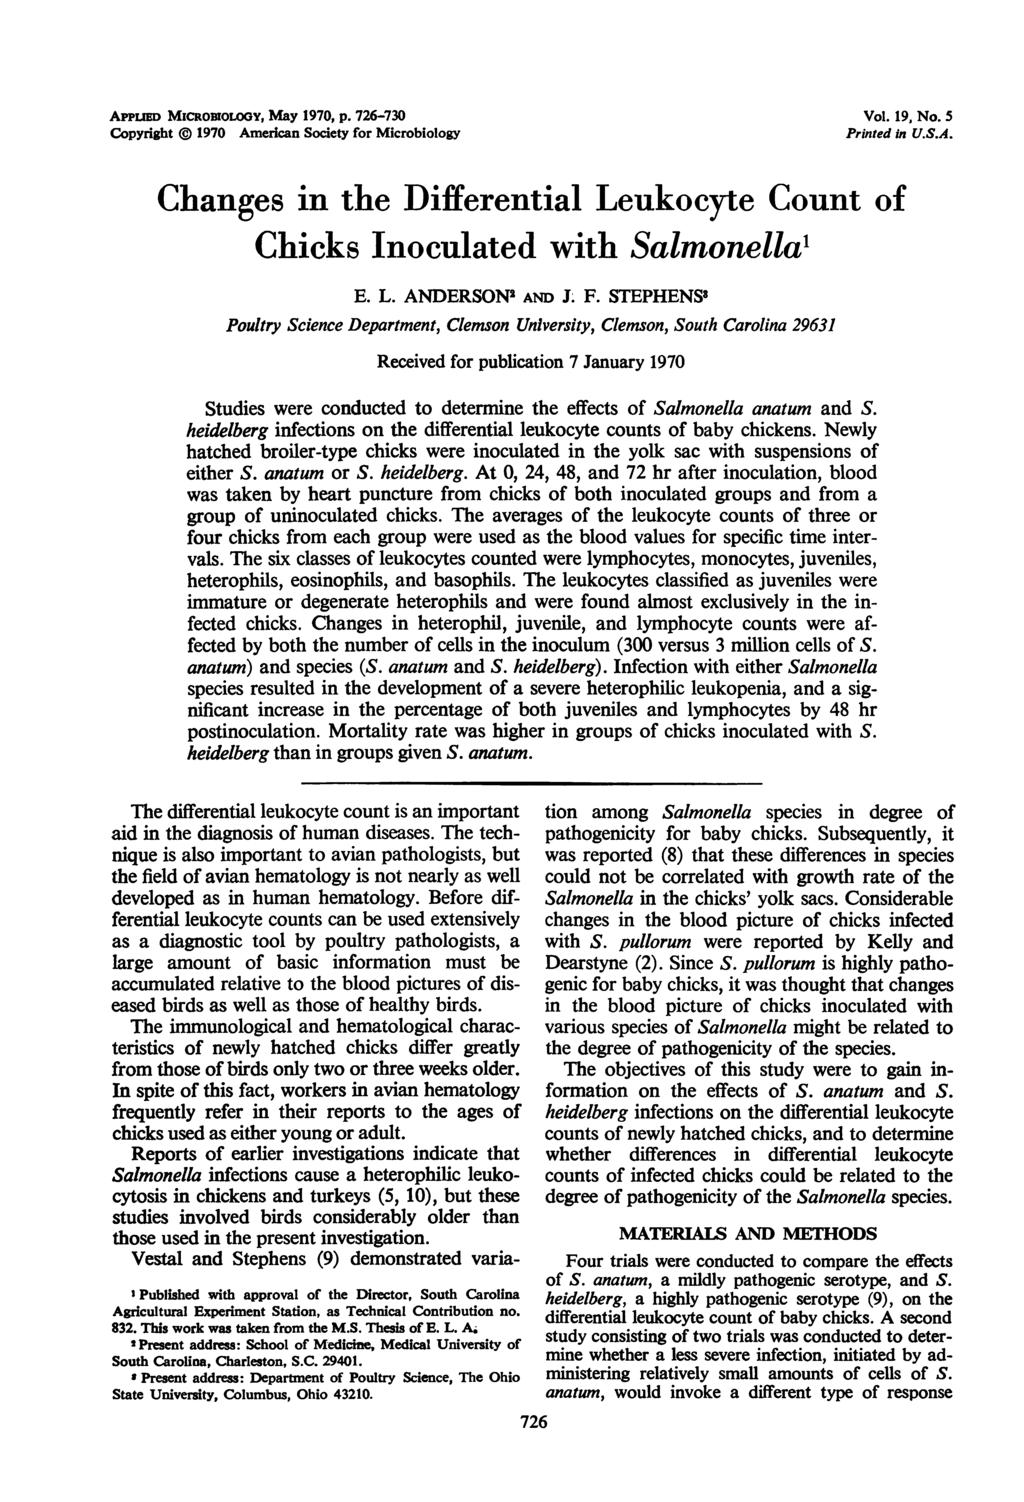 APPuED MCROmOLOGY, May 1970, p. 726-730 Copyright 1970 American Society for Microbiology Vol. 19, No. Printed in U.S.A. Changes in the Differential Leukocyte Count of Chicks noculated with Salmonellal E.